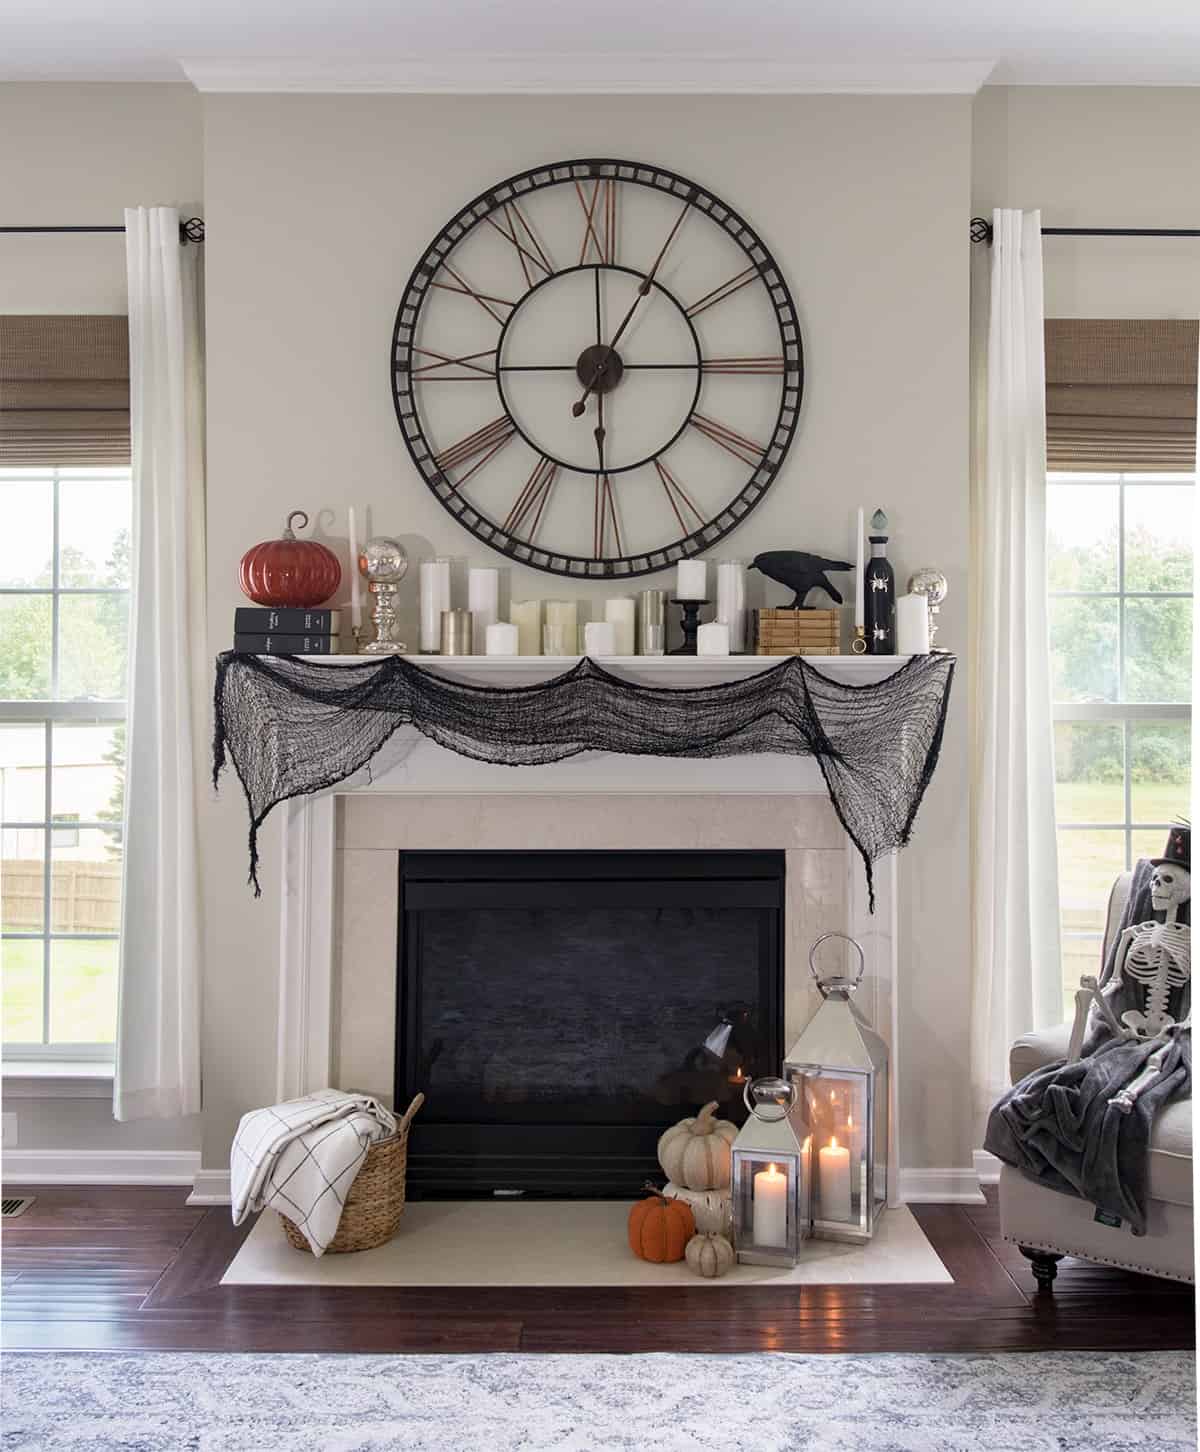 White Fall mantle decorated with candles, pumpkins and Edgar Allen Poe inspired trinkets.